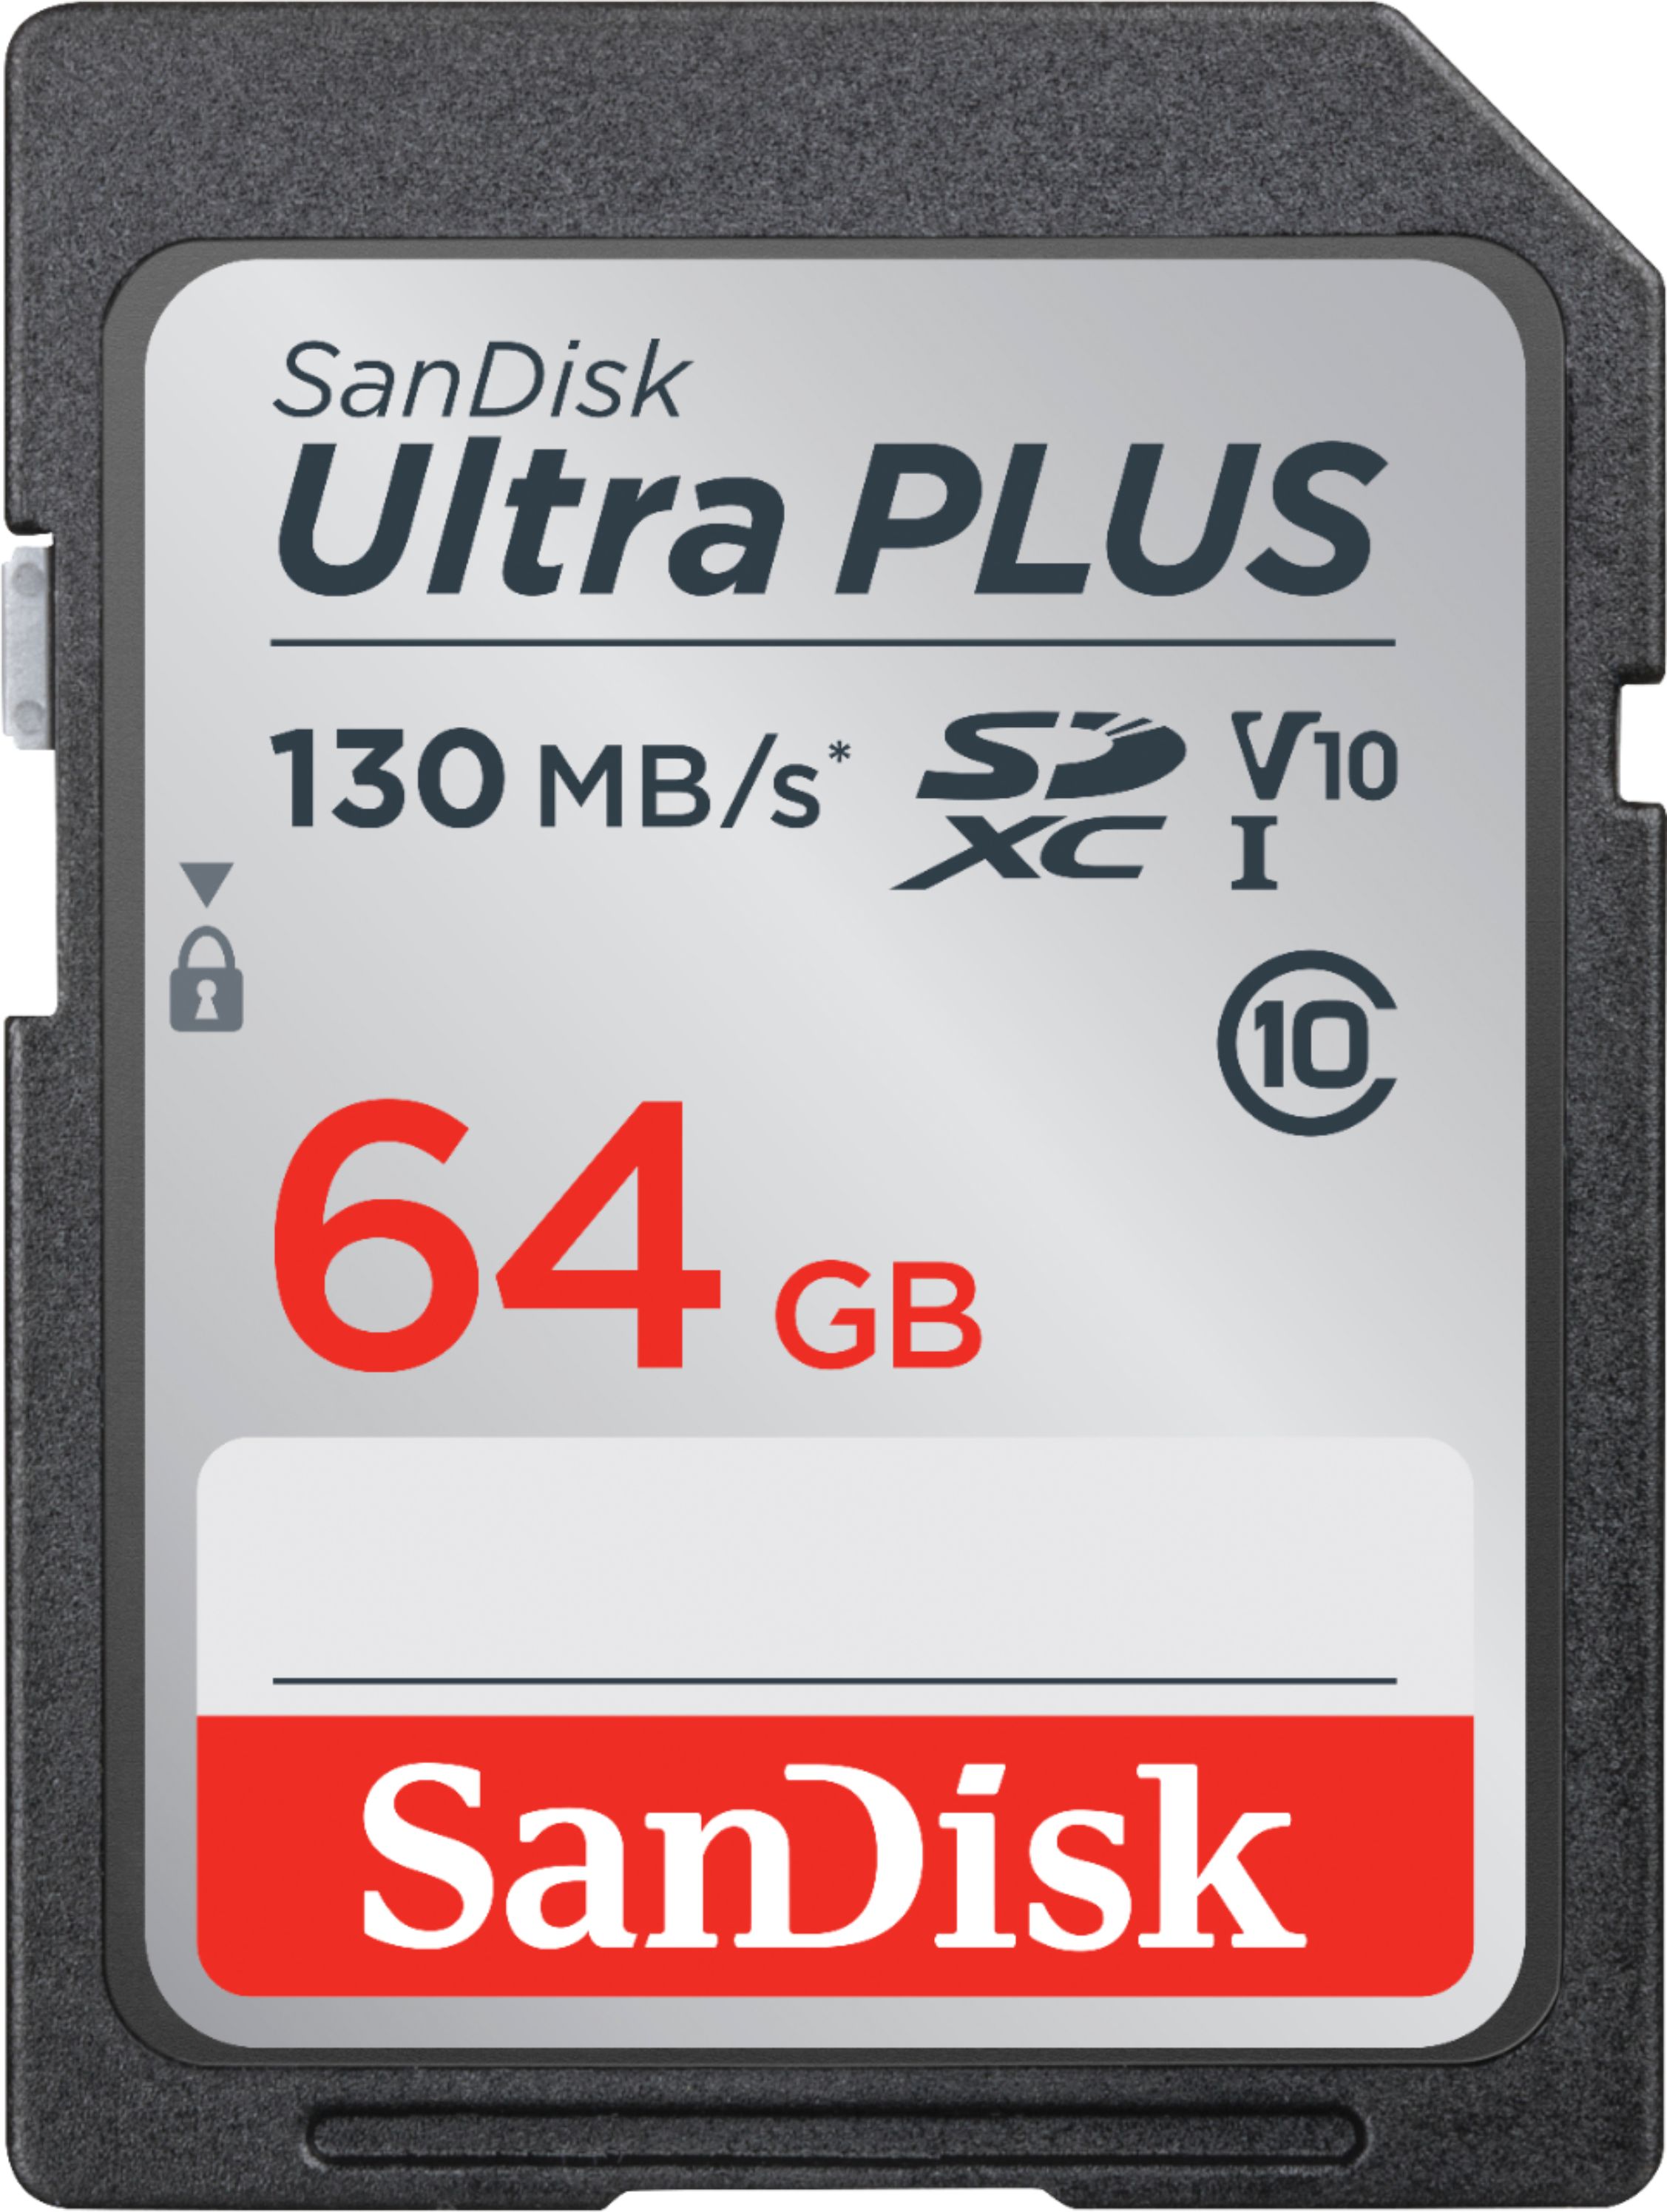 Veri SanDisk Ultra 64GB MicroSDXC Works for Honor 8 Pro by SanFlash 100MBs A1 U1 C10 Works with SanDisk